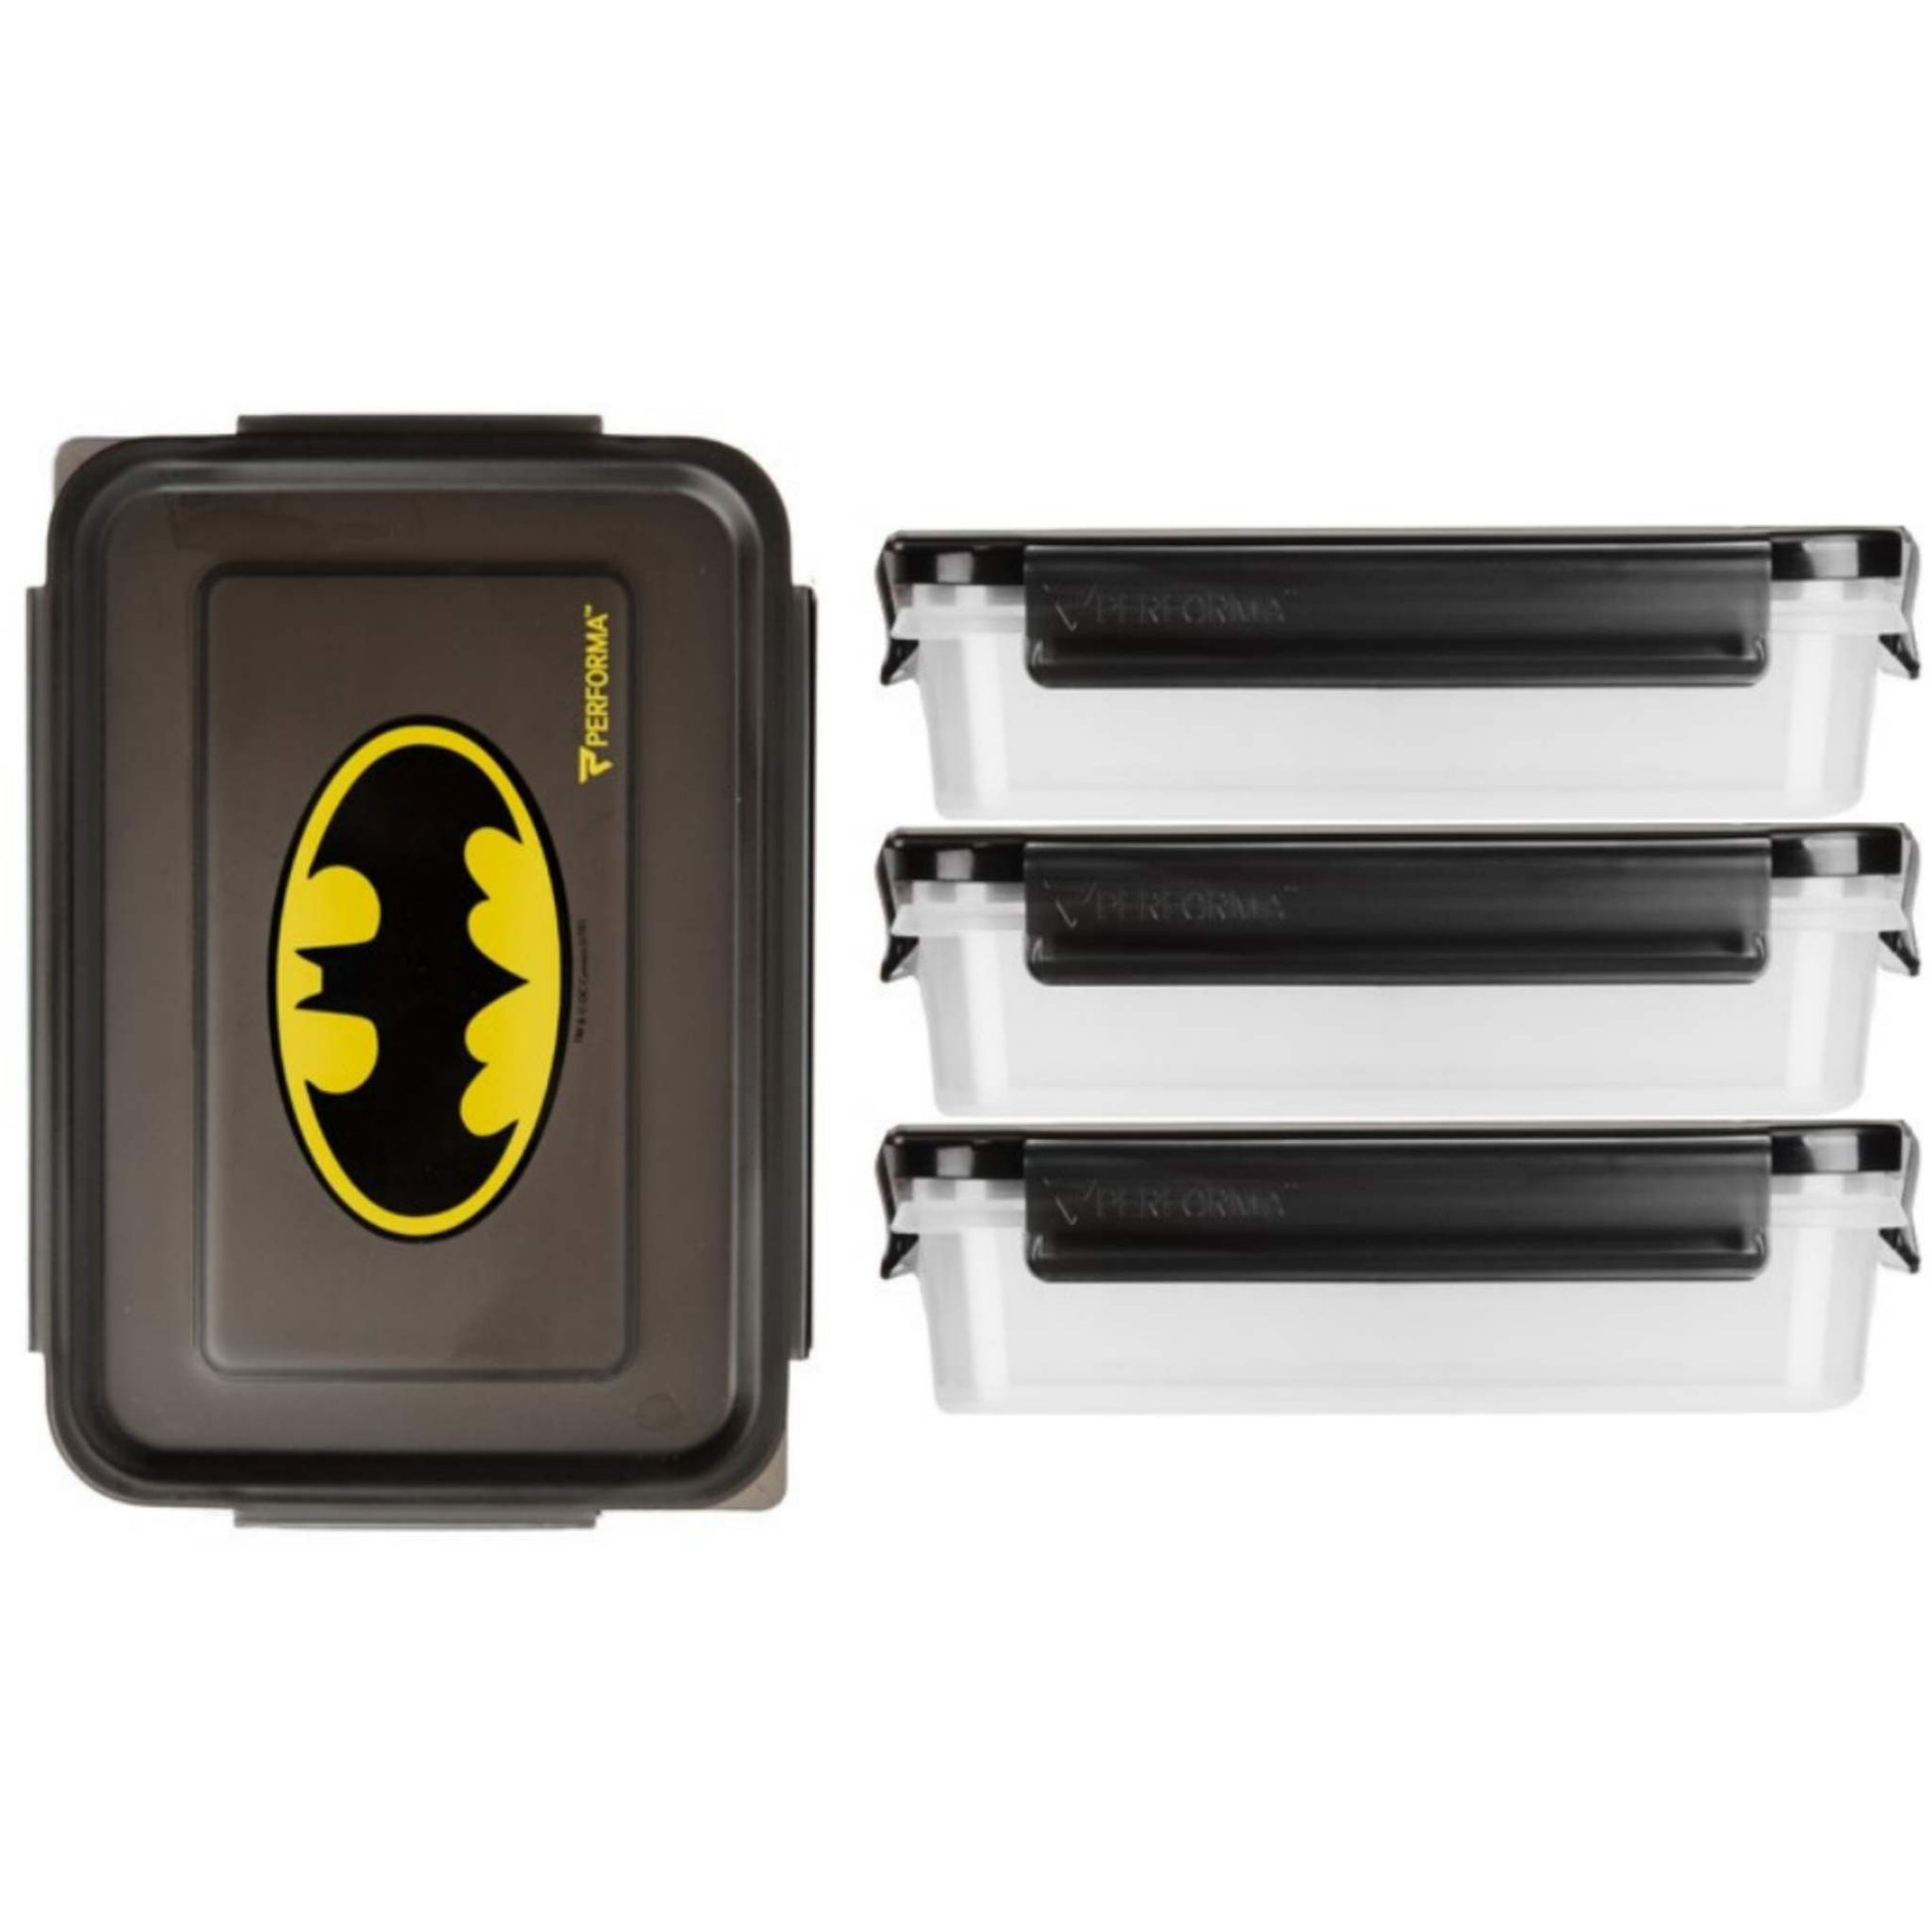 Performa - Meal Containers, 3 Pack, Batman, Team Perfect